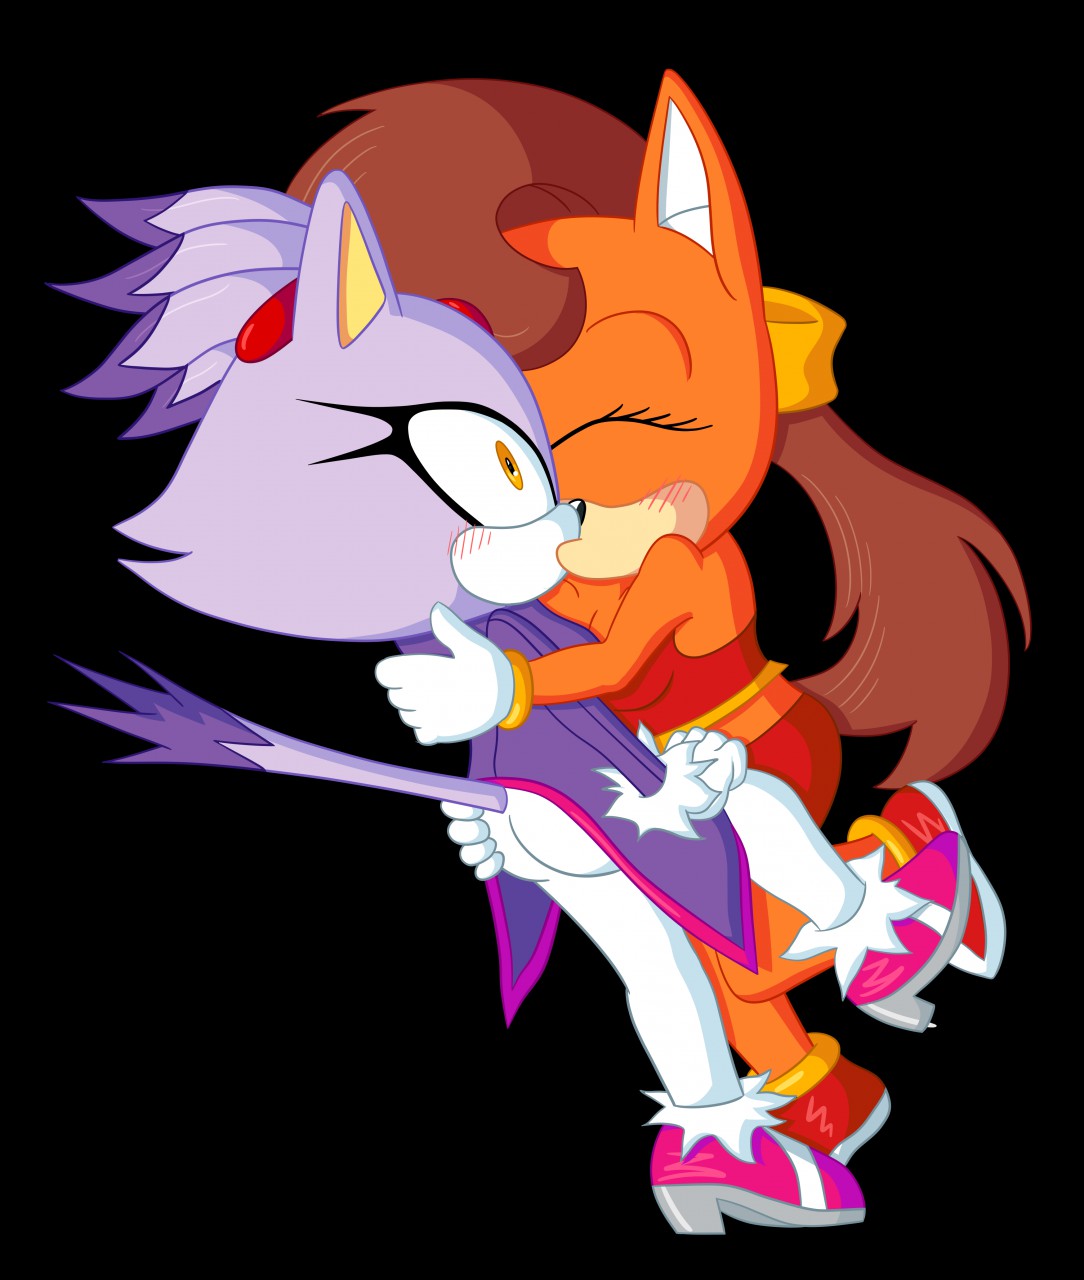 sonic the hedgehog and blaze the cat kissing